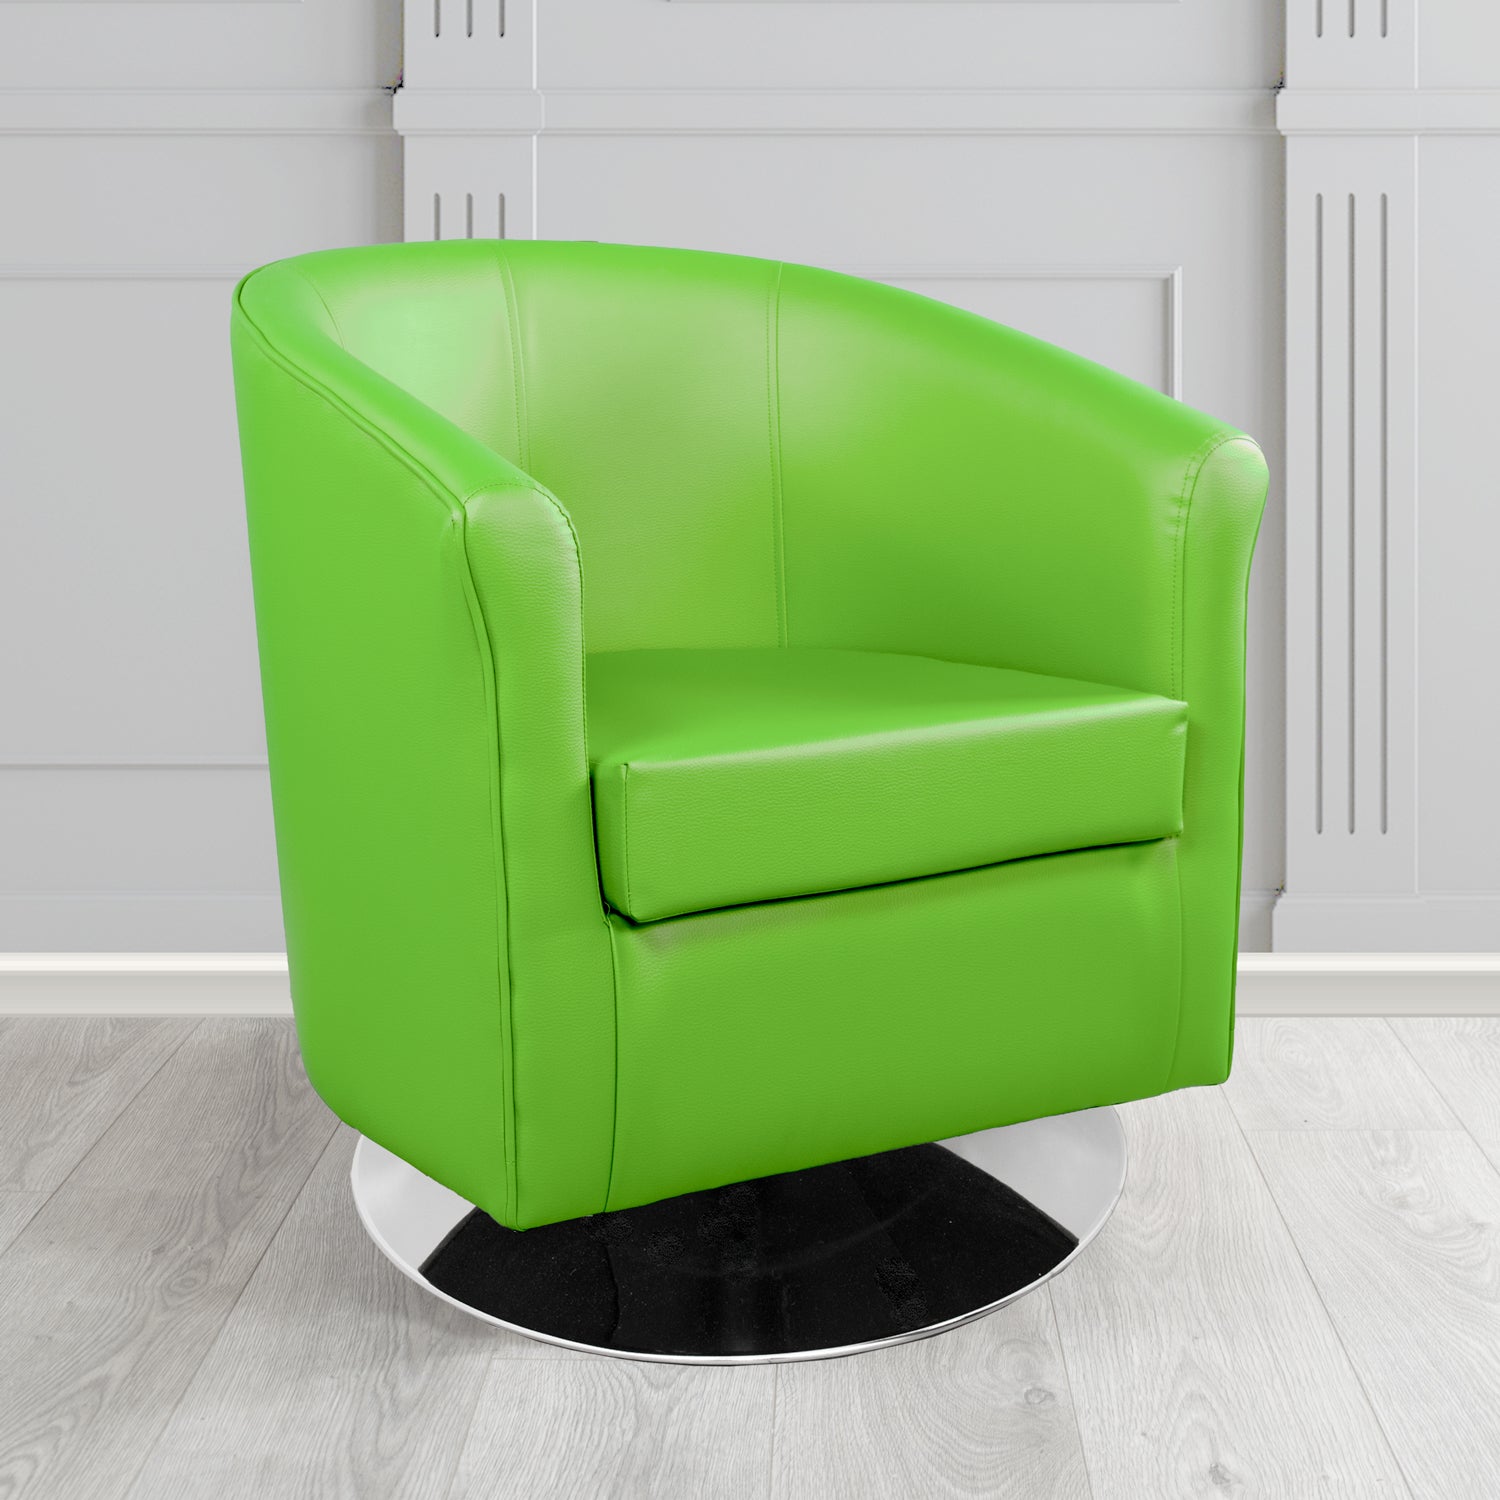 Tuscany Swivel Tub Chair in Madrid Lime Faux Leather - The Tub Chair Shop